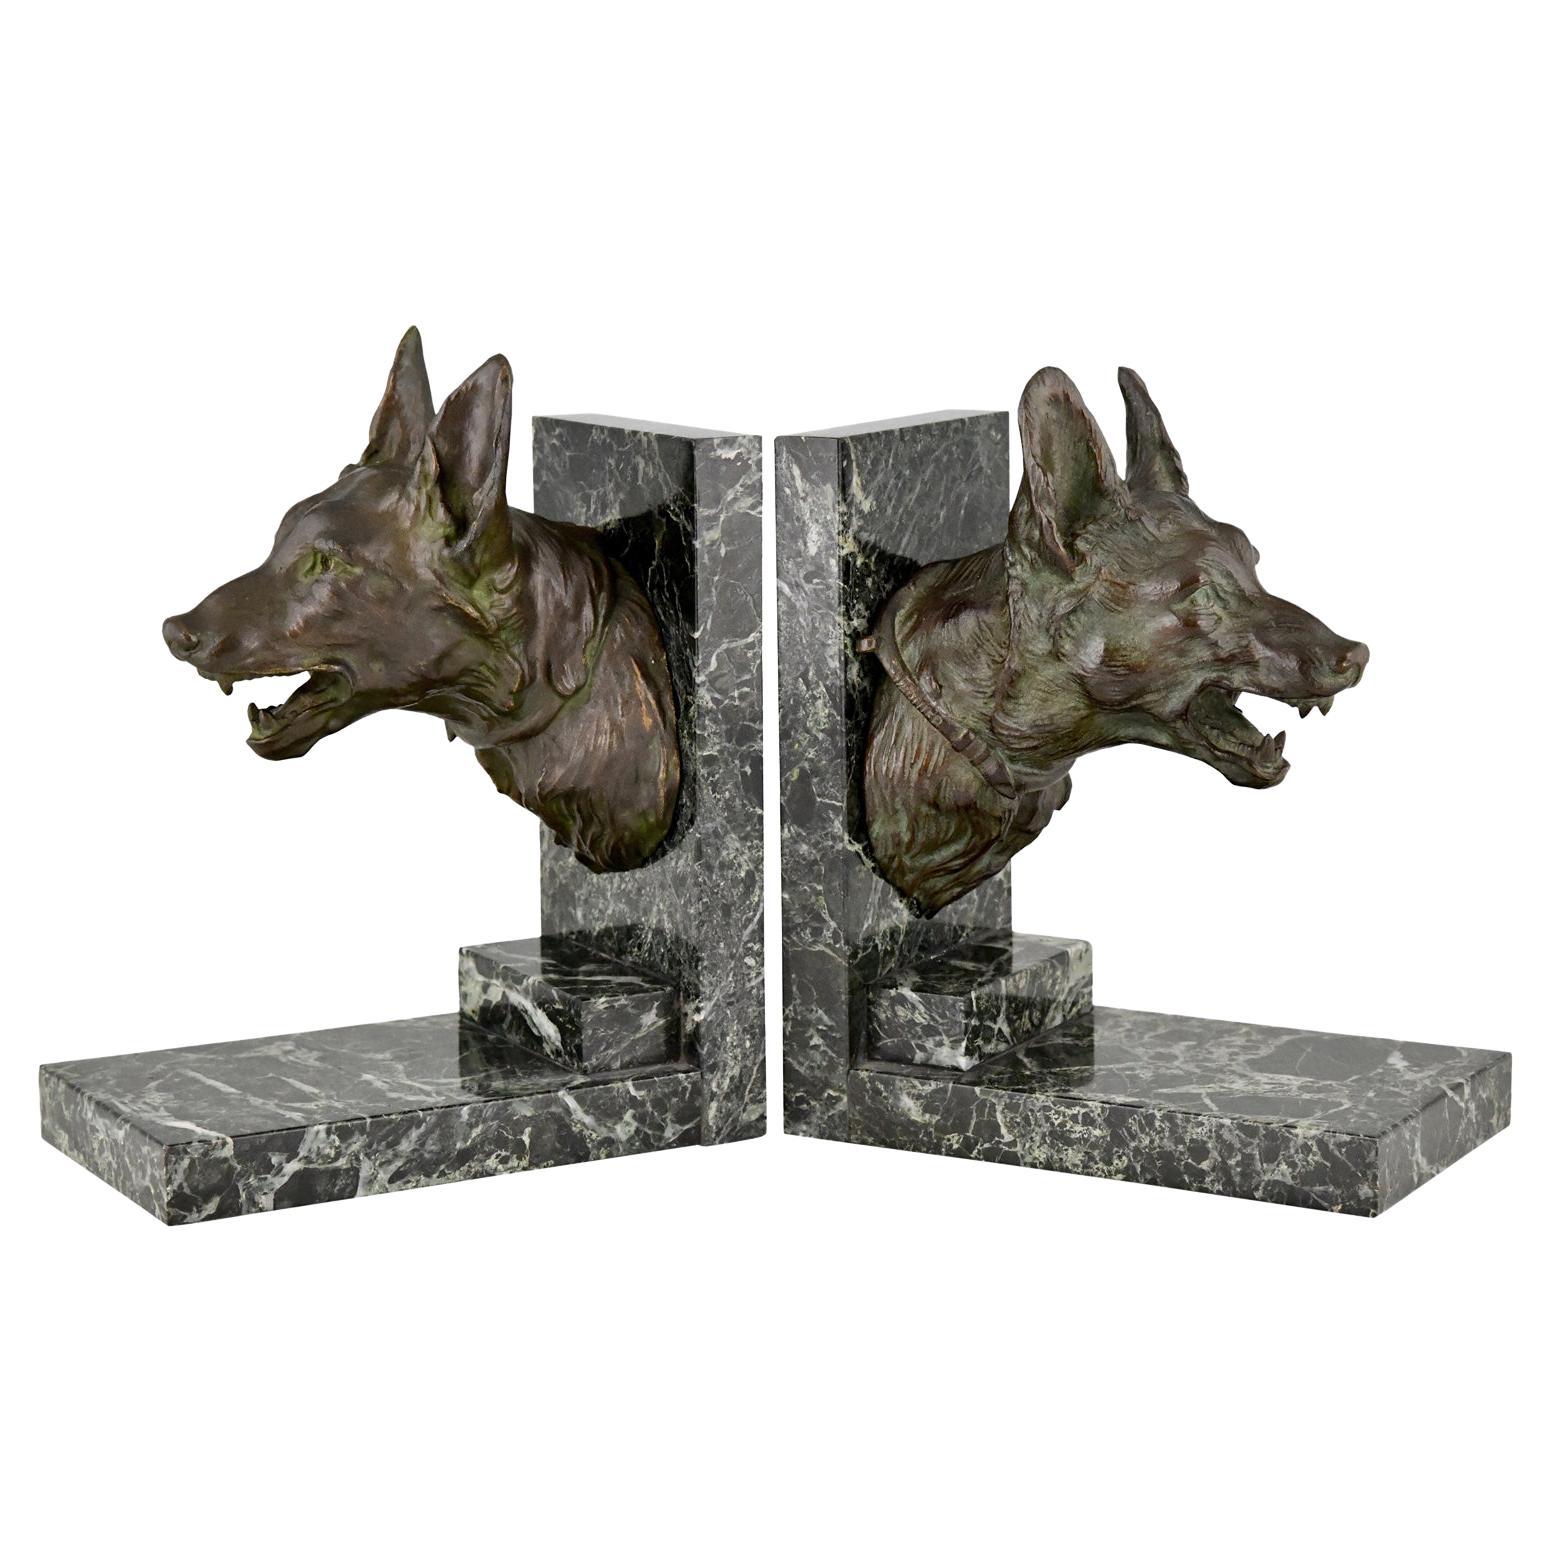 Art Deco Bronze Bookends with Shepherd Dogs by Varnier, France, 1925